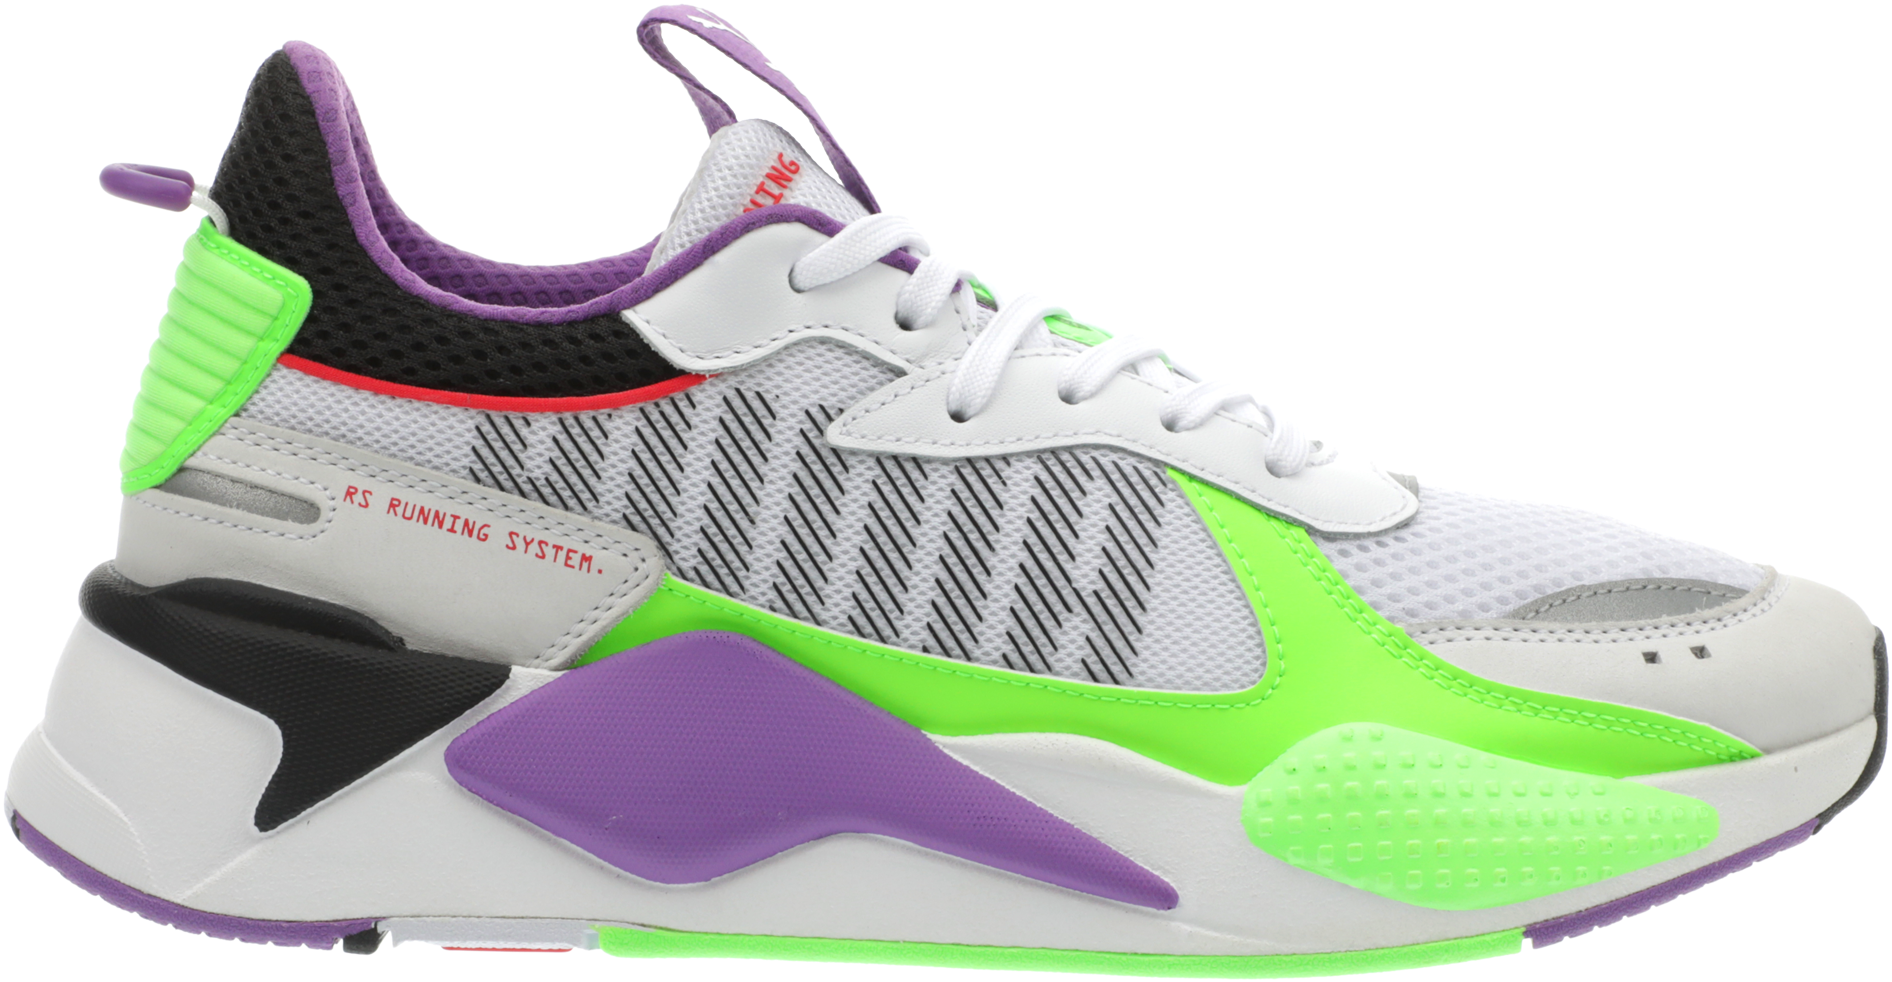 Puma R S Running System Sneaker PNG